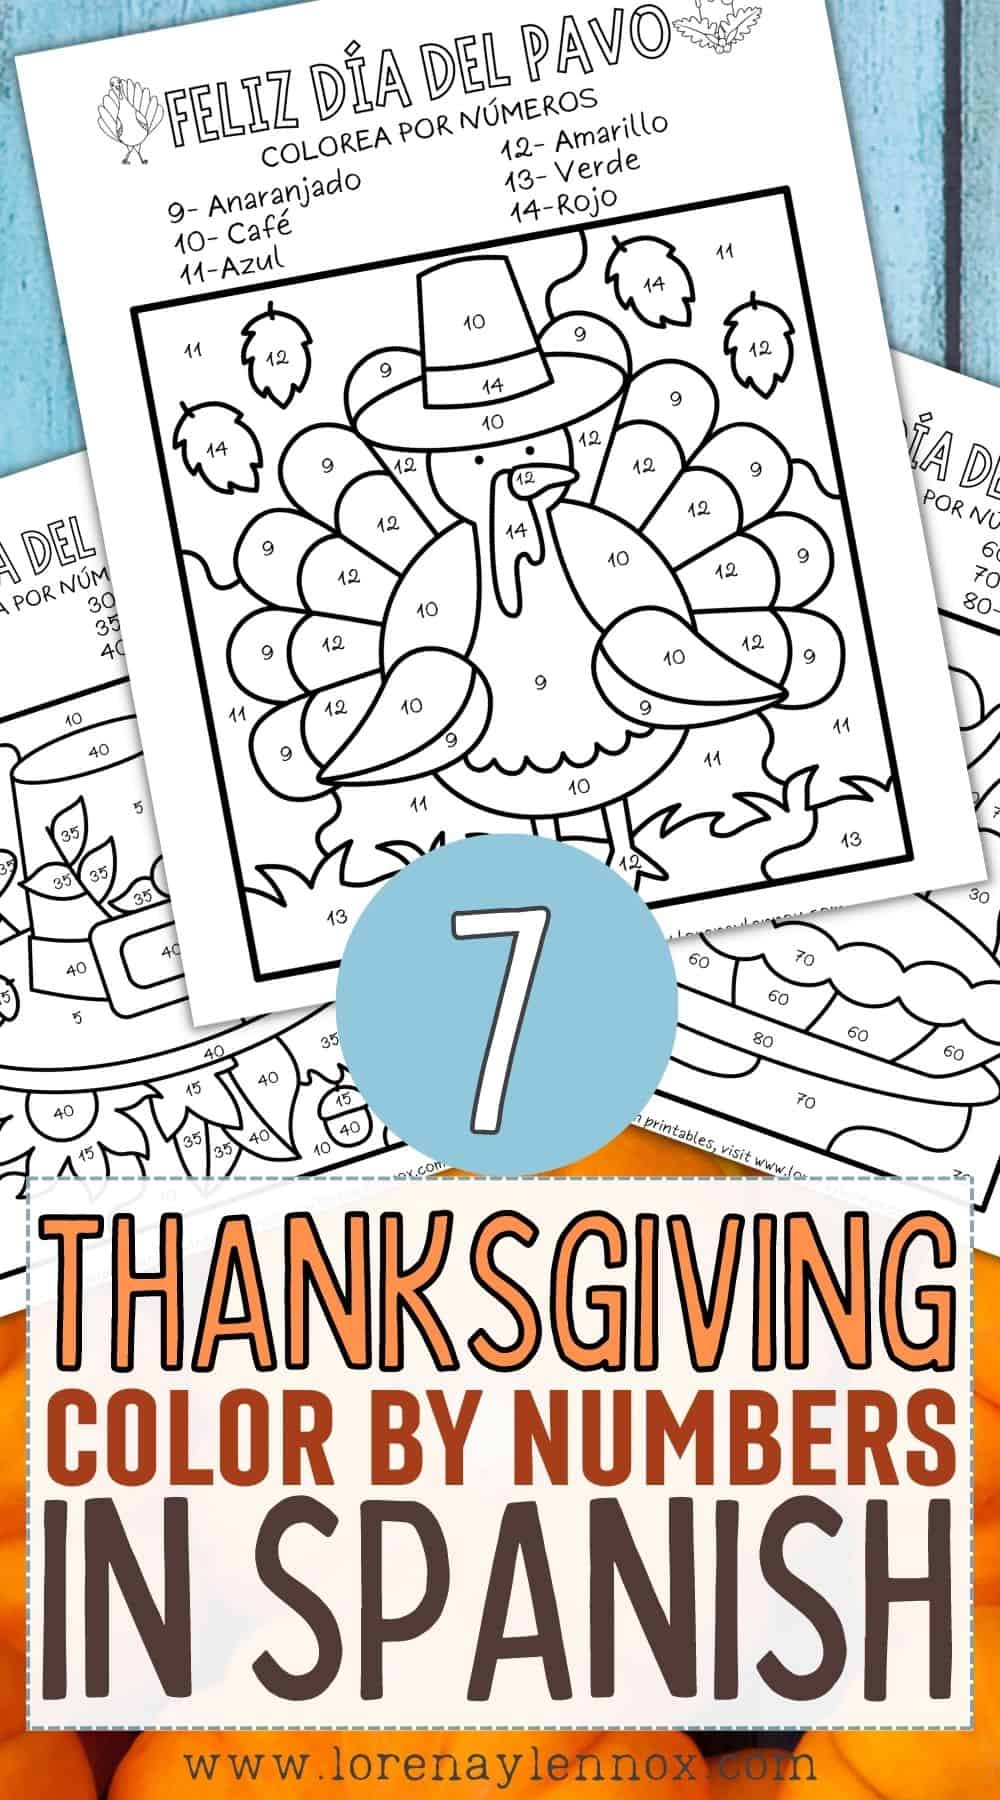 Thanksgiving_color_by_number_Spanish